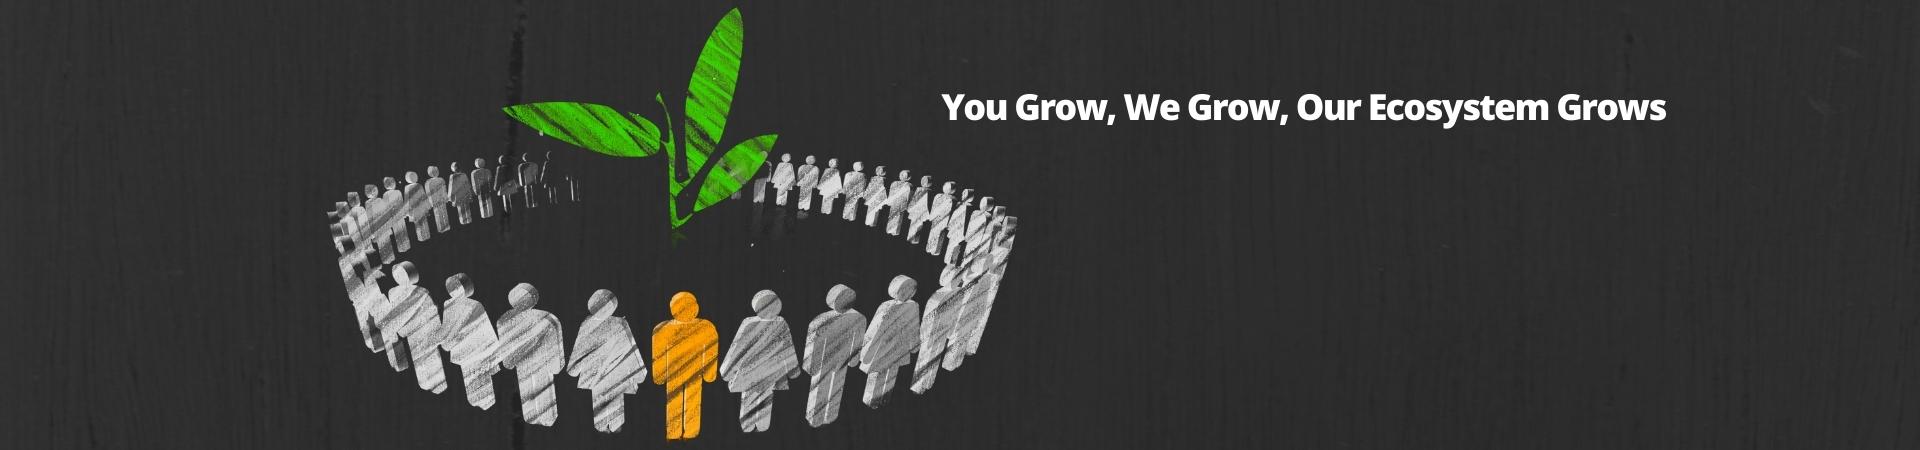 You Grow, we grow, Our ecosystem grows